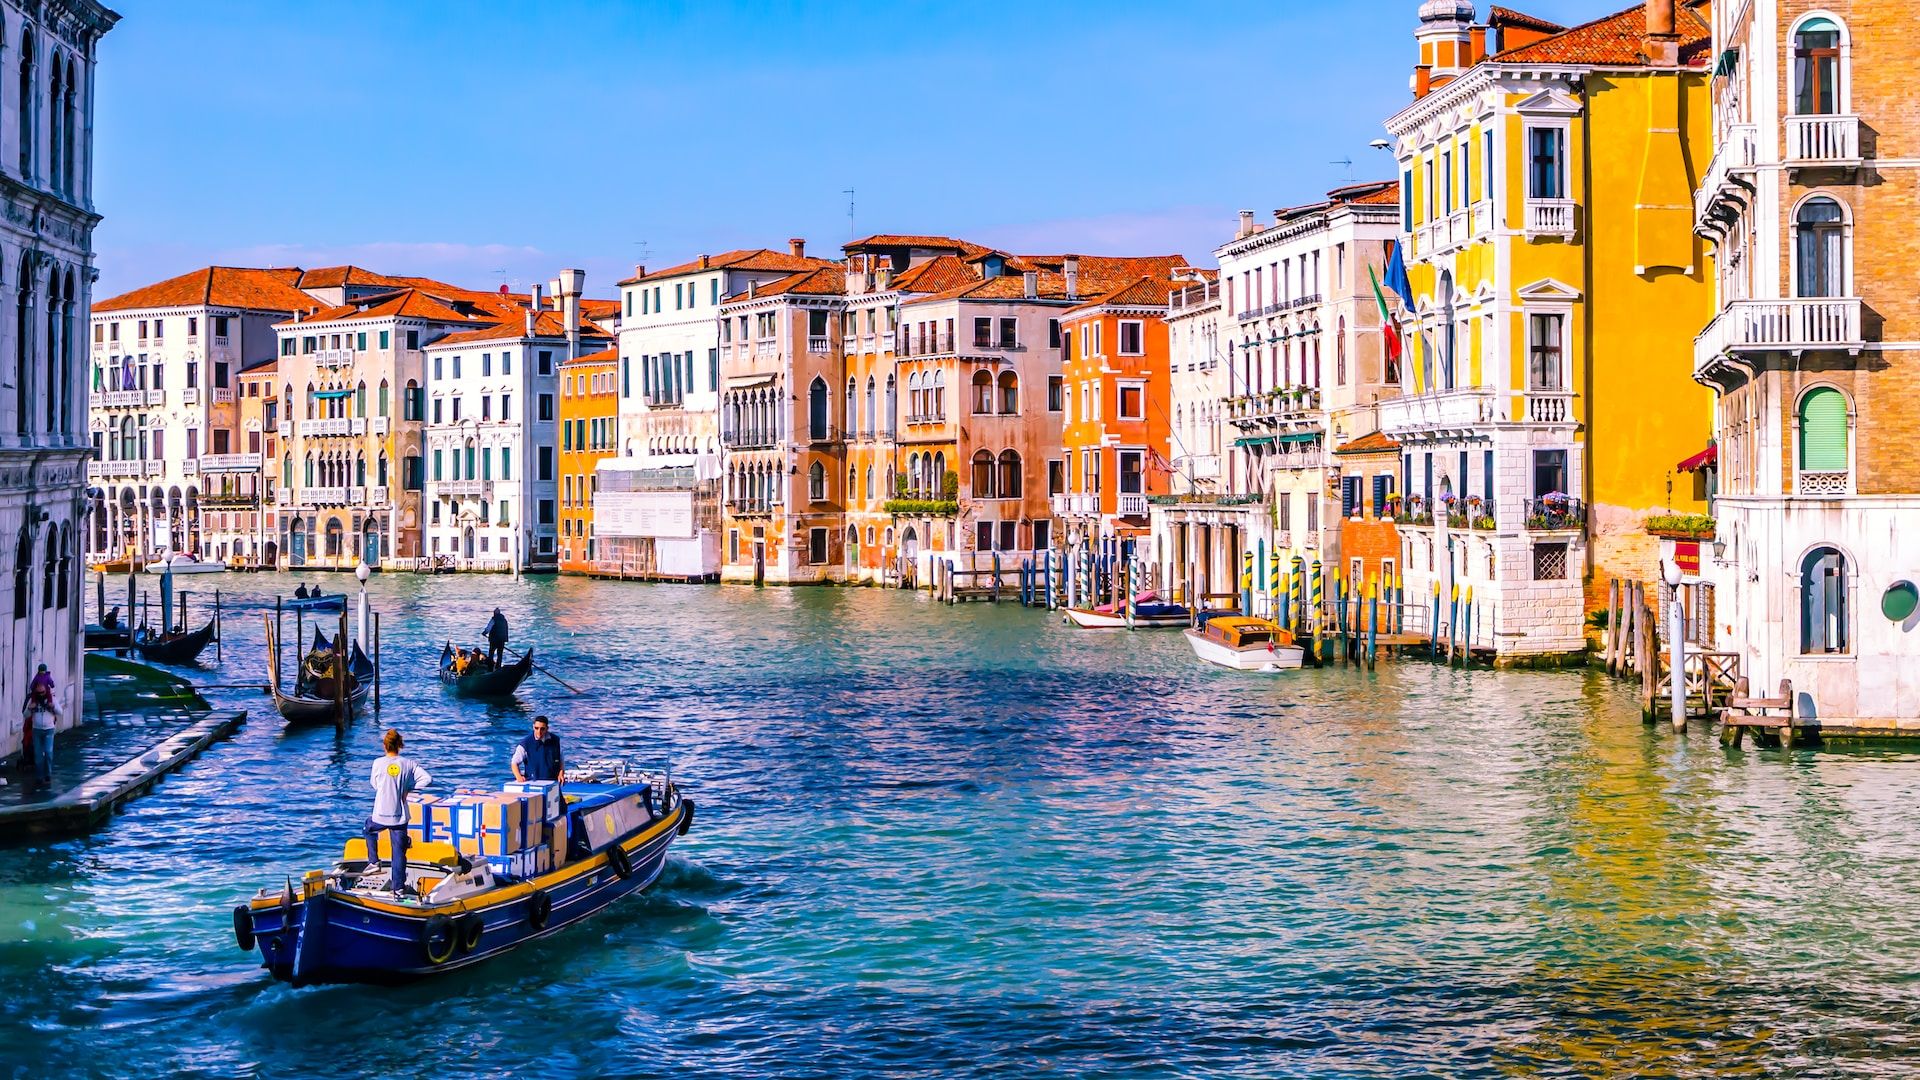 Bright days and colorful houses on a peaceful canal in Venice